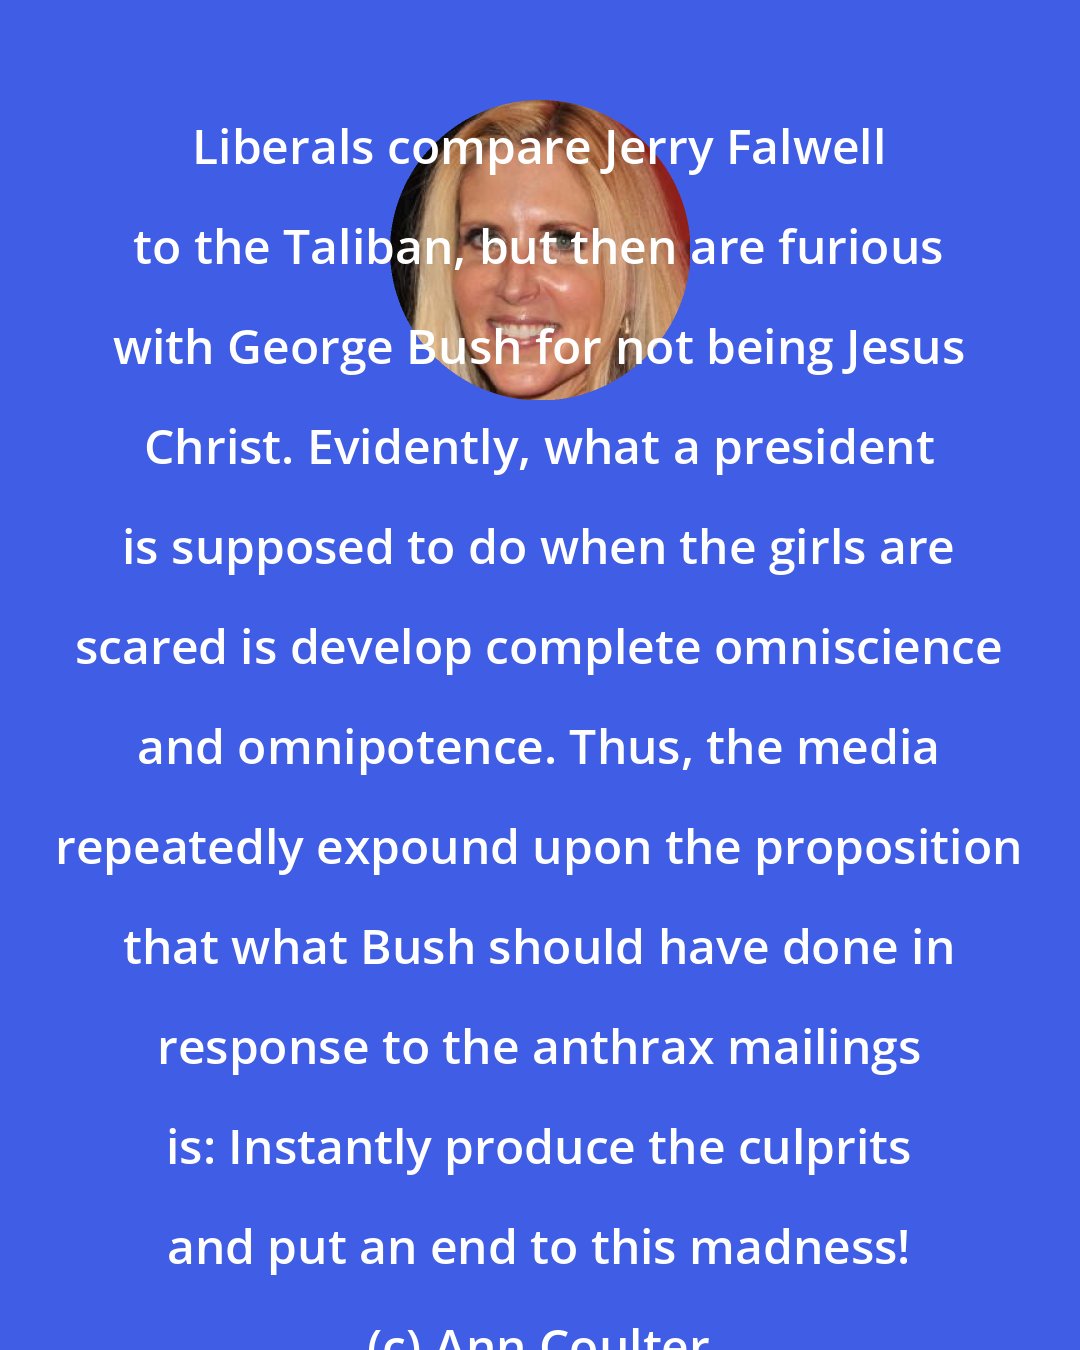 Ann Coulter: Liberals compare Jerry Falwell to the Taliban, but then are furious with George Bush for not being Jesus Christ. Evidently, what a president is supposed to do when the girls are scared is develop complete omniscience and omnipotence. Thus, the media repeatedly expound upon the proposition that what Bush should have done in response to the anthrax mailings is: Instantly produce the culprits and put an end to this madness!